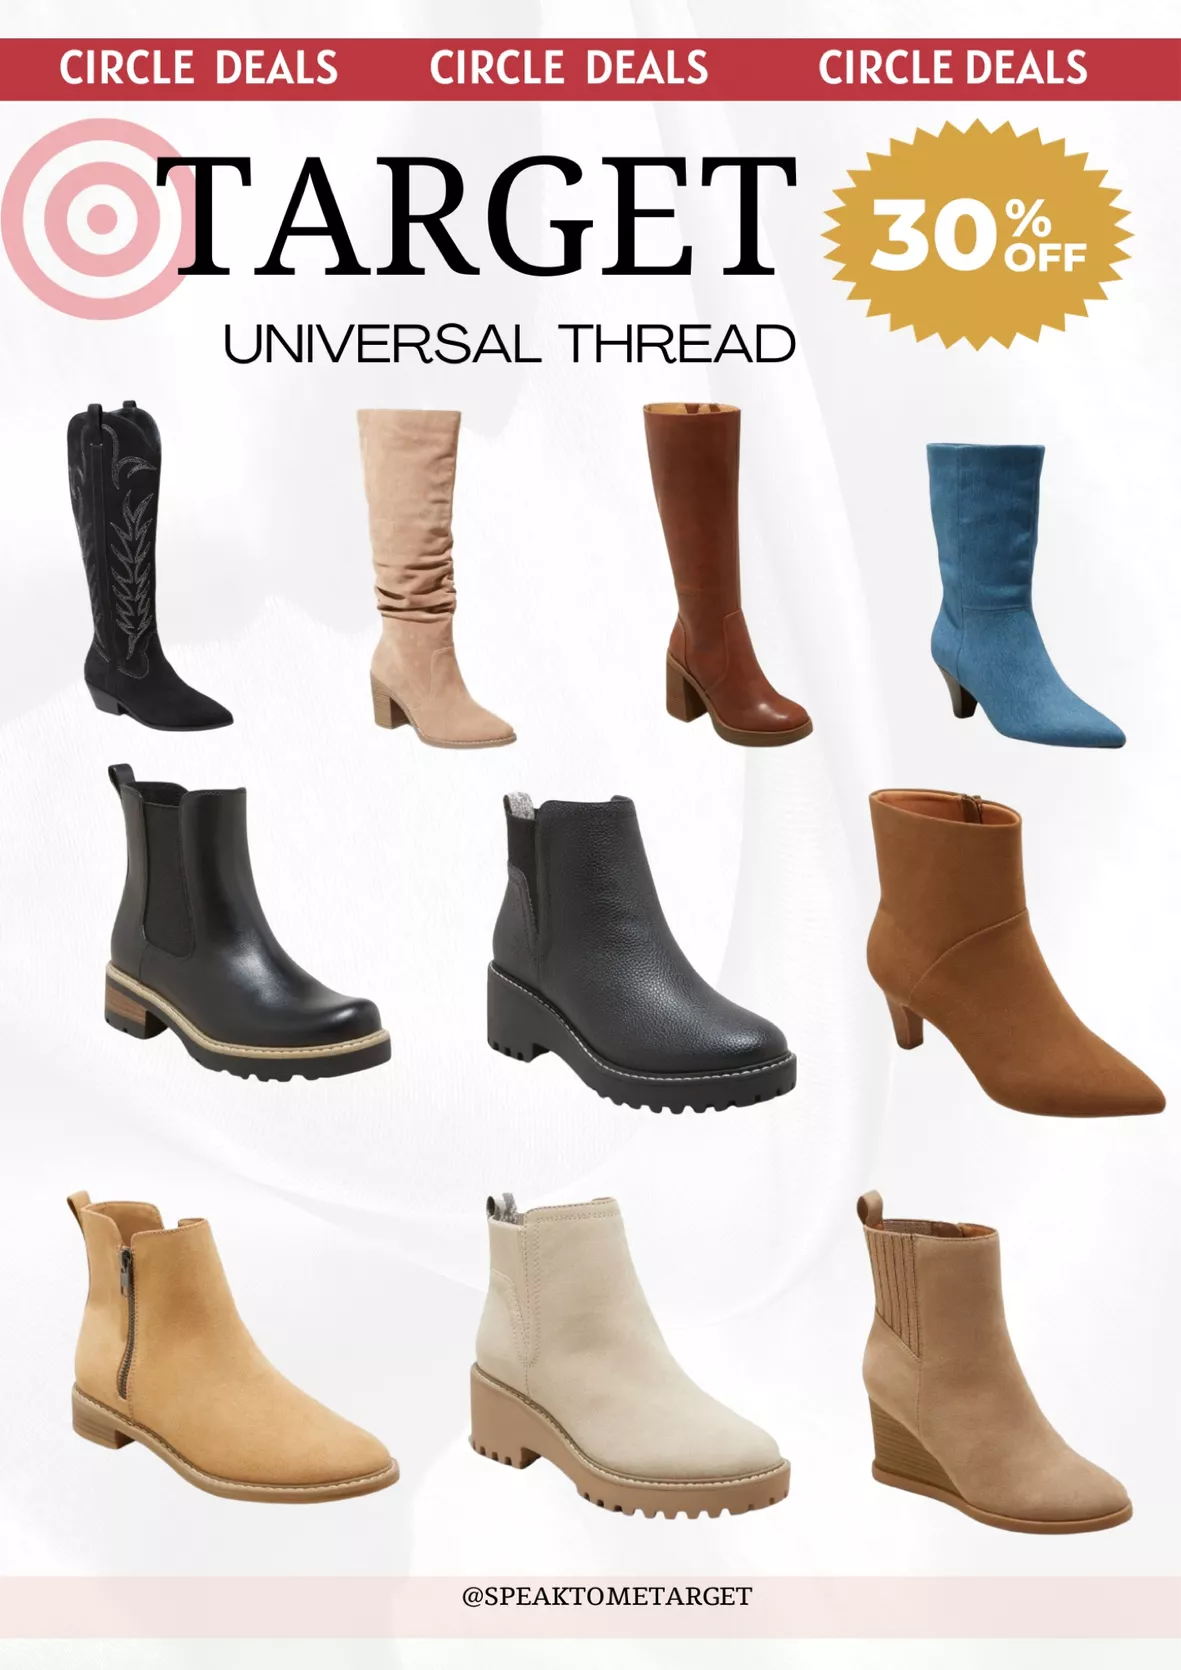 Universal Thread, Shoes